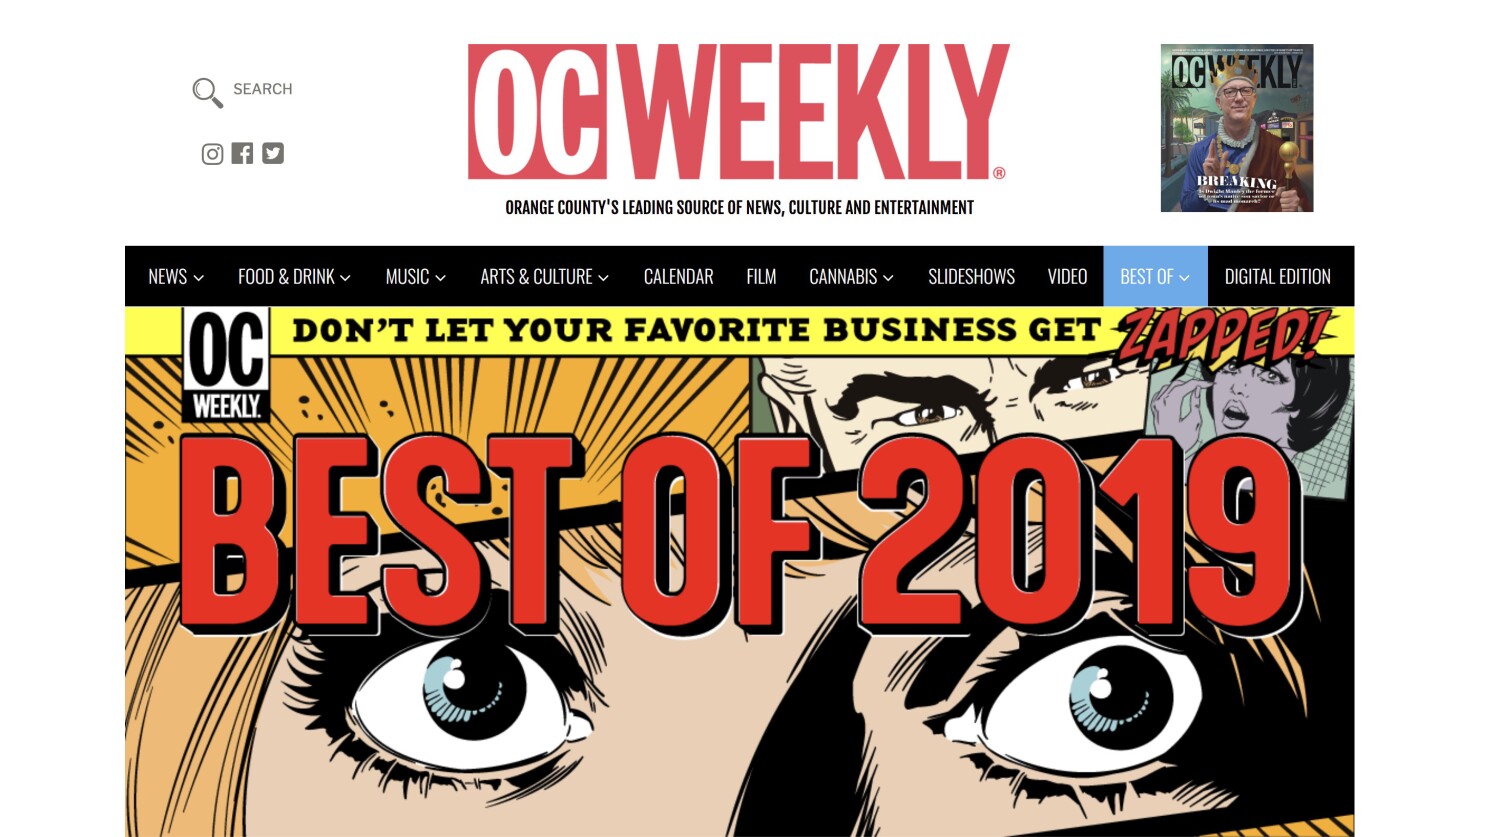 Newsletter: Why the death of OC Weekly matters